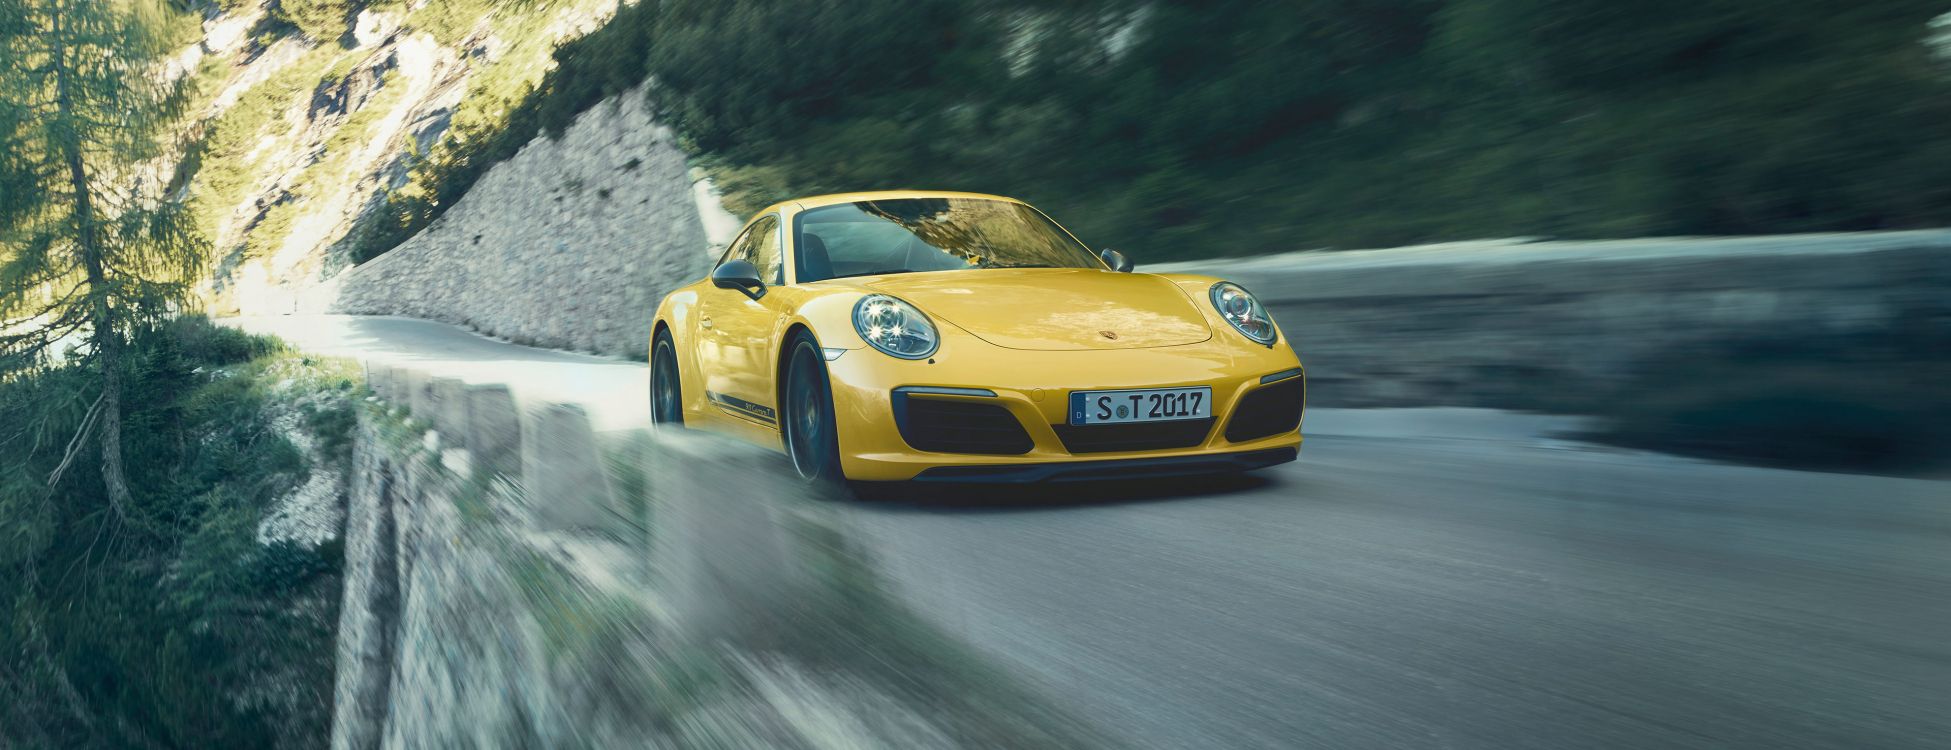 Yellow Porsche 911 on Road During Daytime. Wallpaper in 3840x1476 Resolution